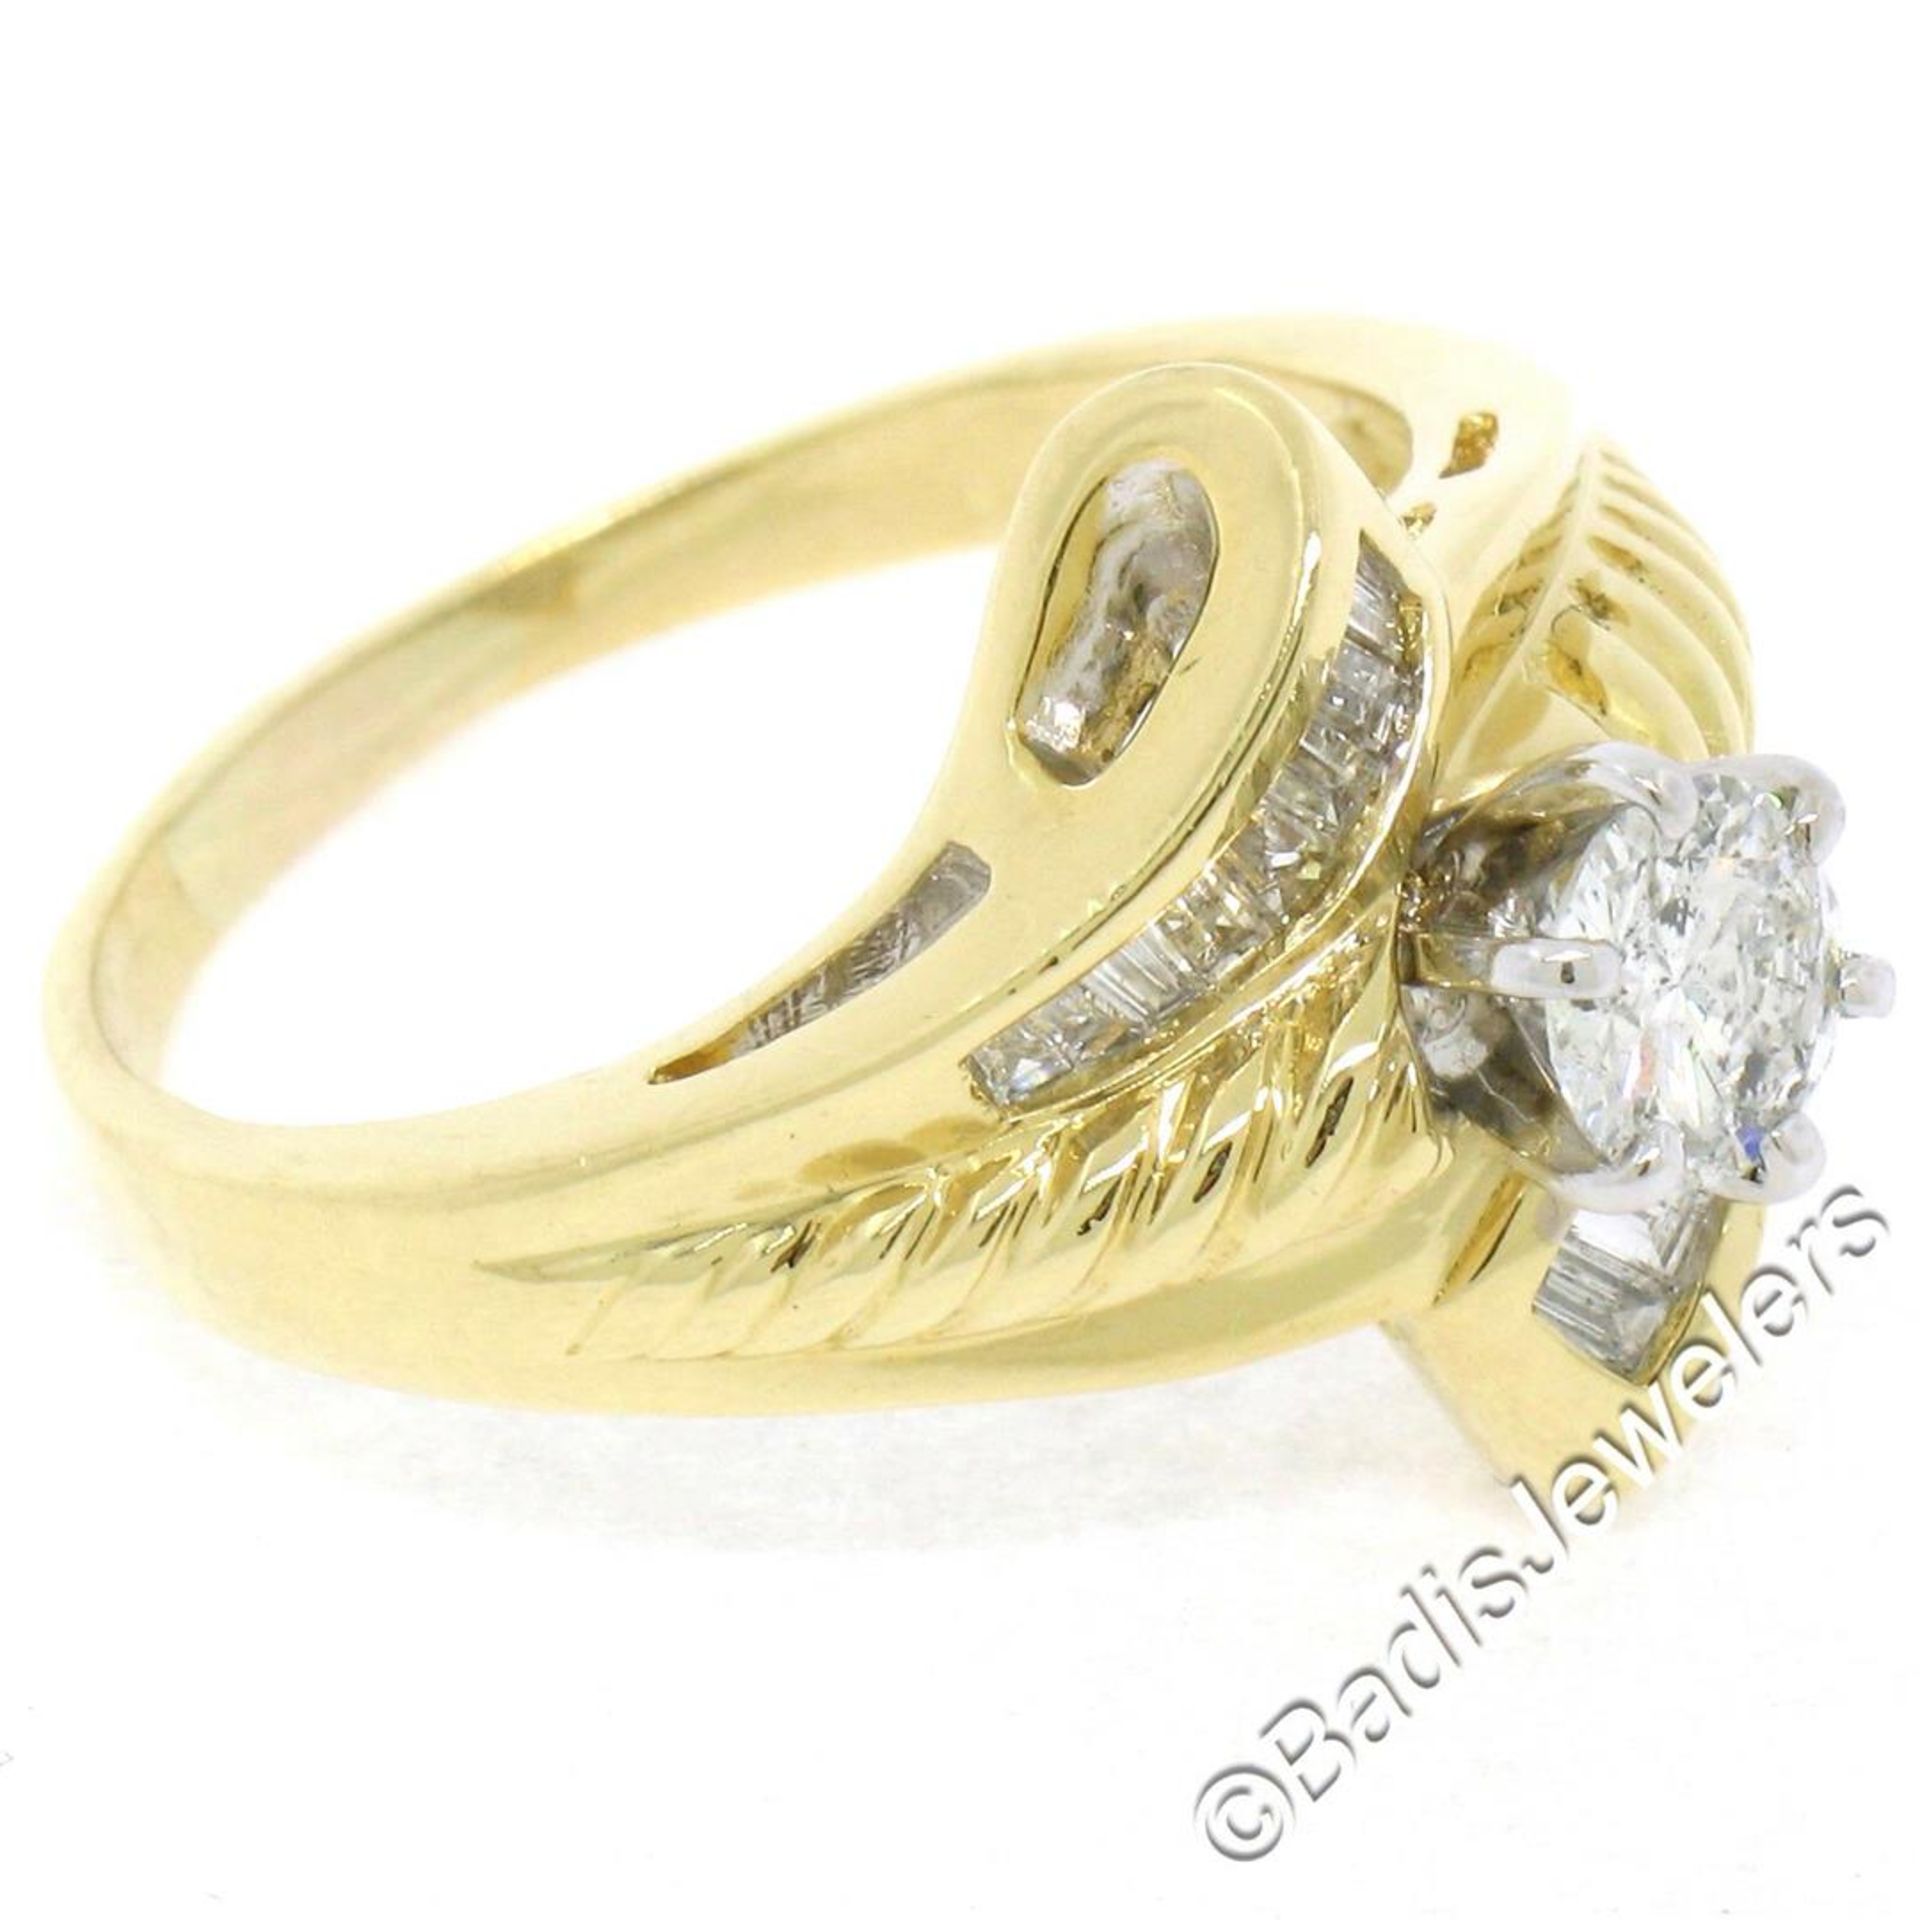 18kt Yellow and White Gold 0.90ctw Round and Baguette Diamond Ring - Image 6 of 8